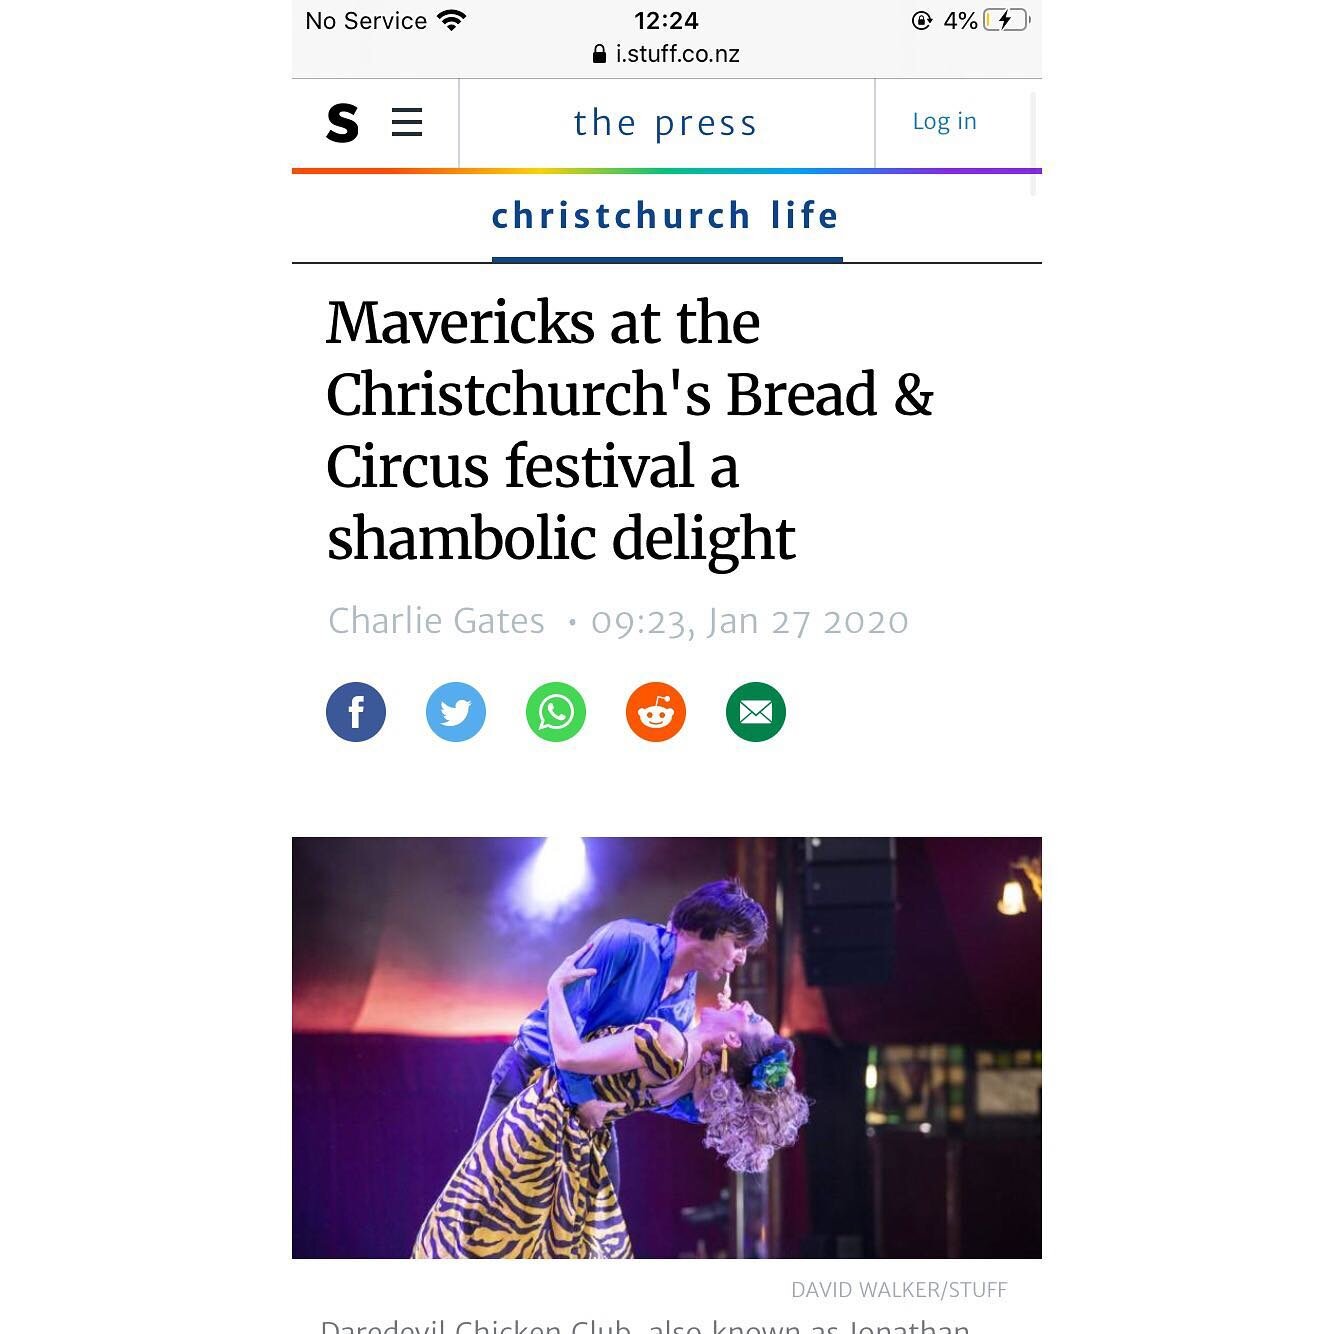 &ldquo;Mavericks: A Muppet style variety show... hilarious hour of artfully shambolic fun&rdquo; 
The Press (What a gorgeous way to start a day off)